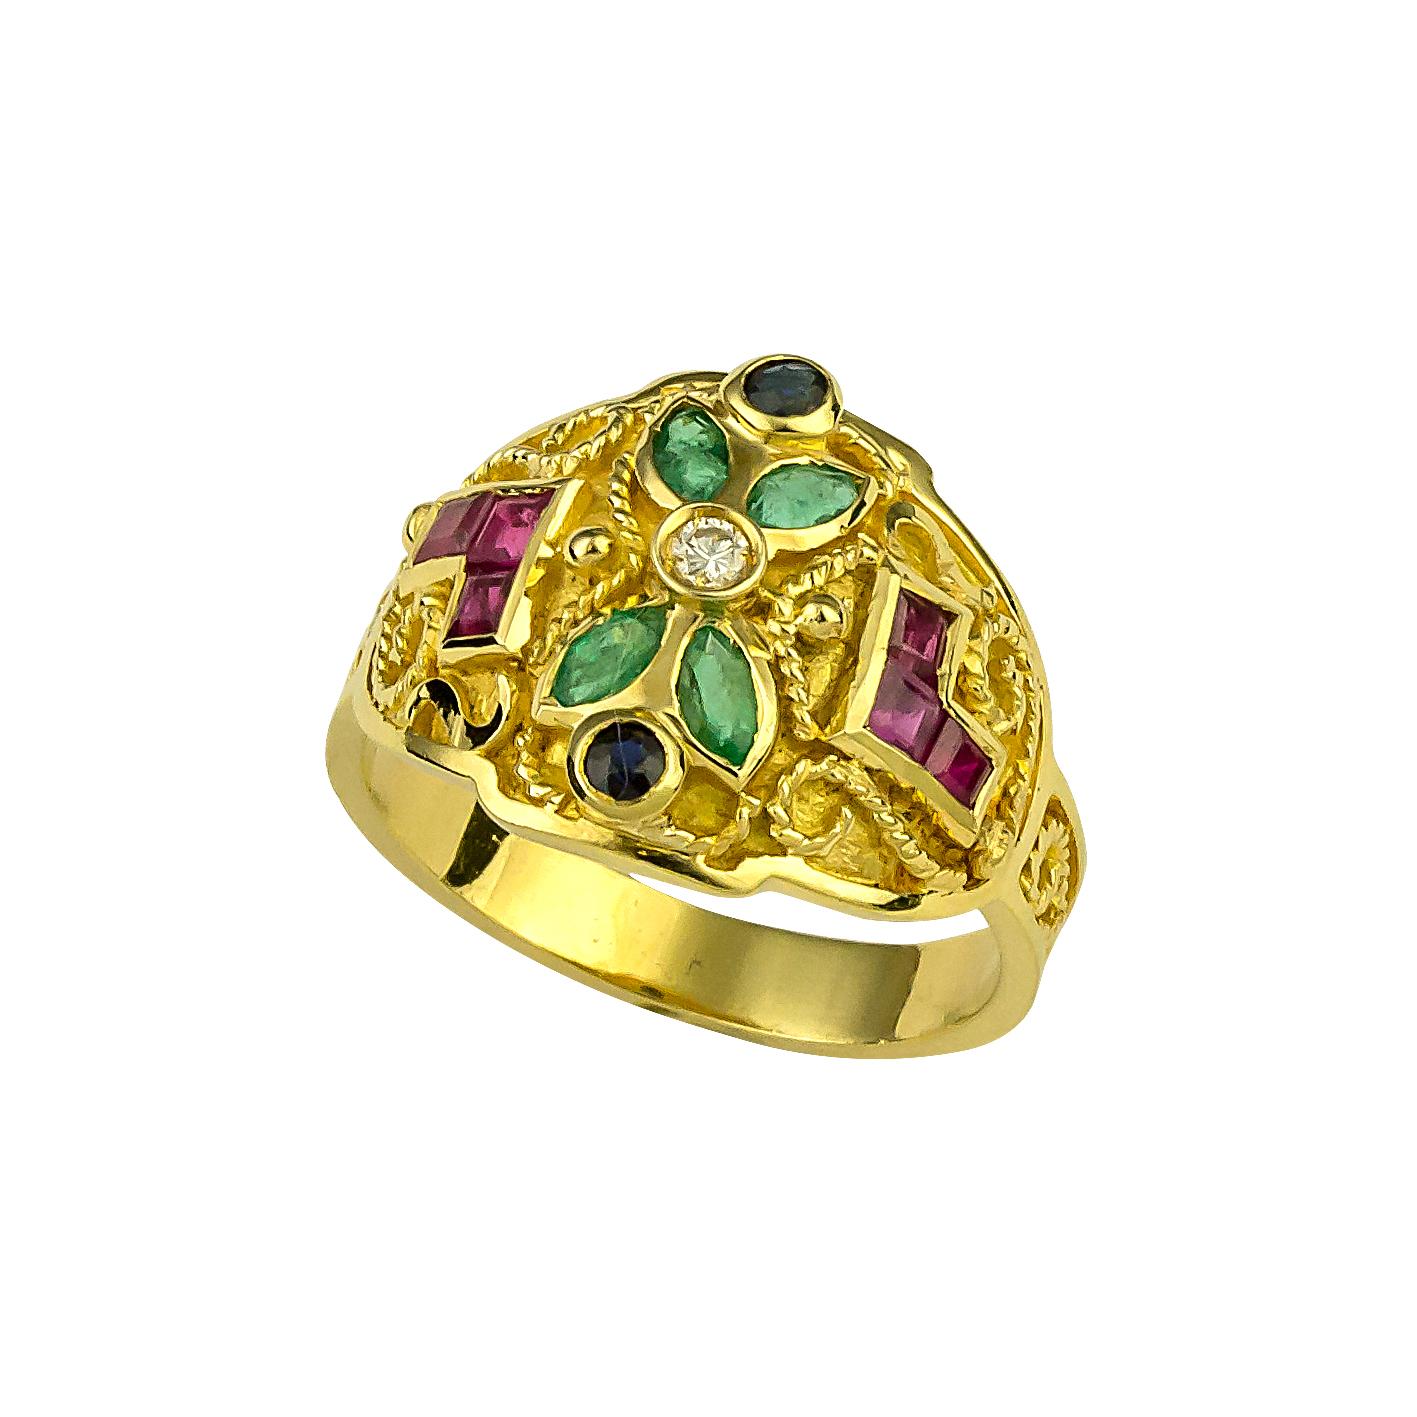 This S.Georgios design multicolor ring is 18 Karat Yellow Gold and is all hand made with Byzantine workmanship and has granulation work which is done microscopically. It features Brilliant cut Diamonds in the center total weight of 0.05 Carat, and